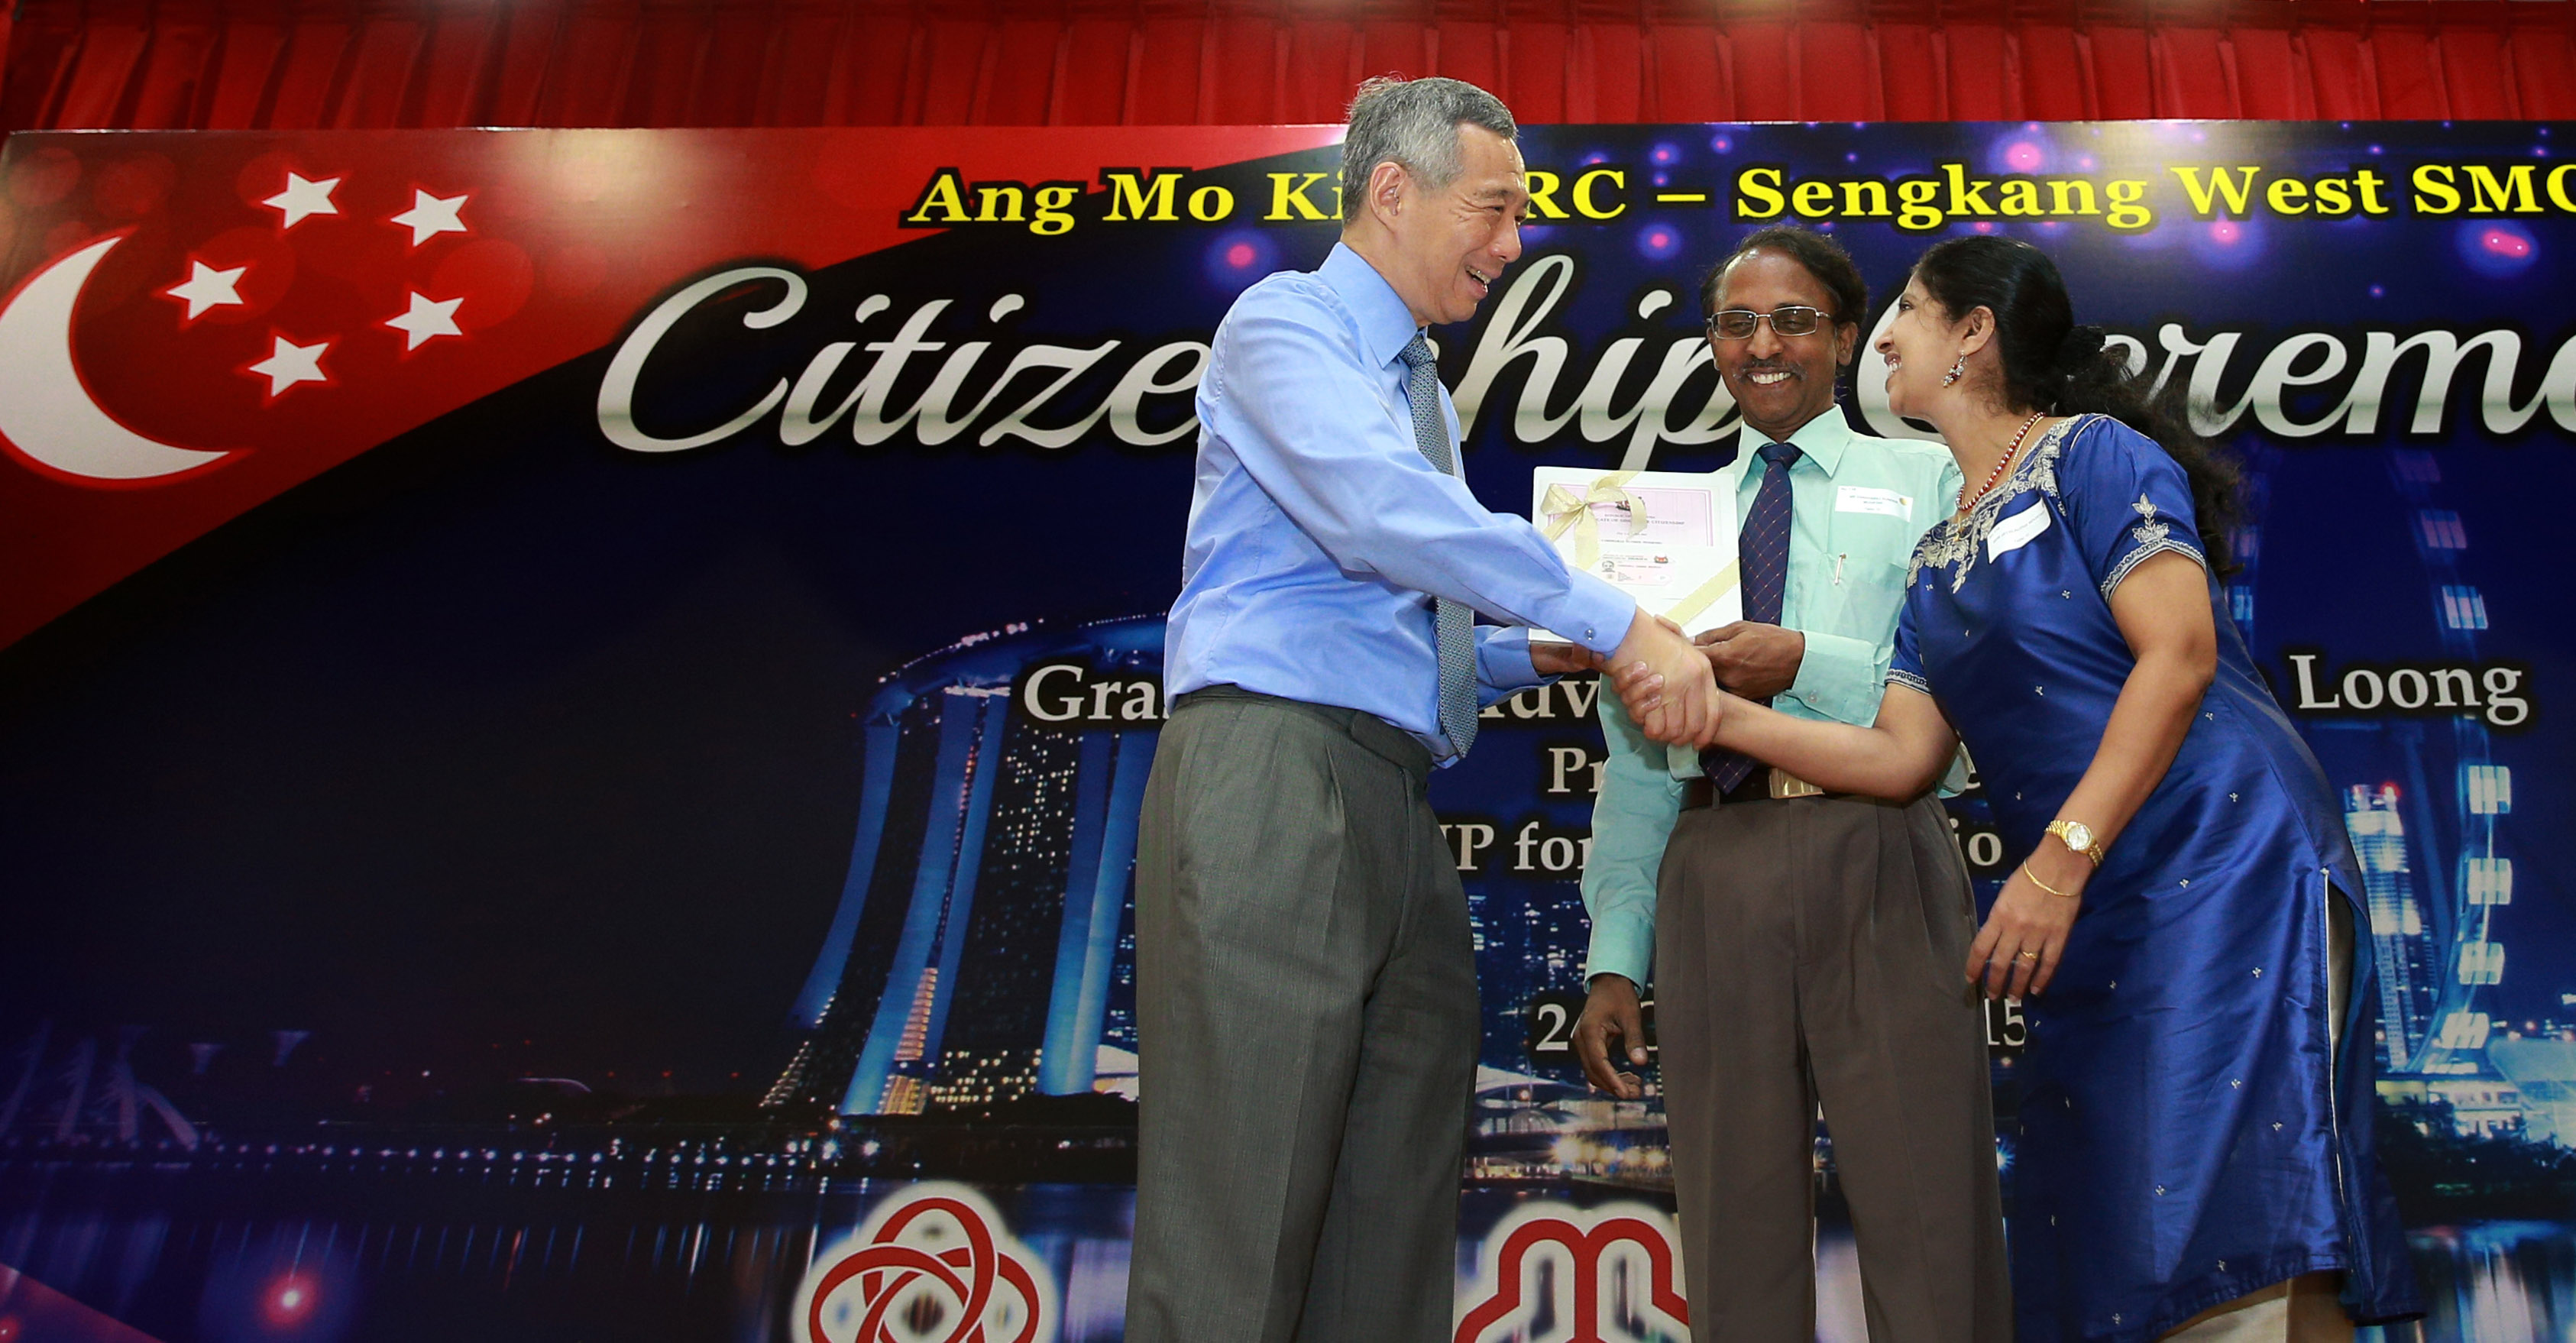 PM Lee at the Ang Mo Kio GRC - Sengkang West SMC Citizenship Ceremony on 24 Oct 2015 (MCI Photo by Terence Tan)